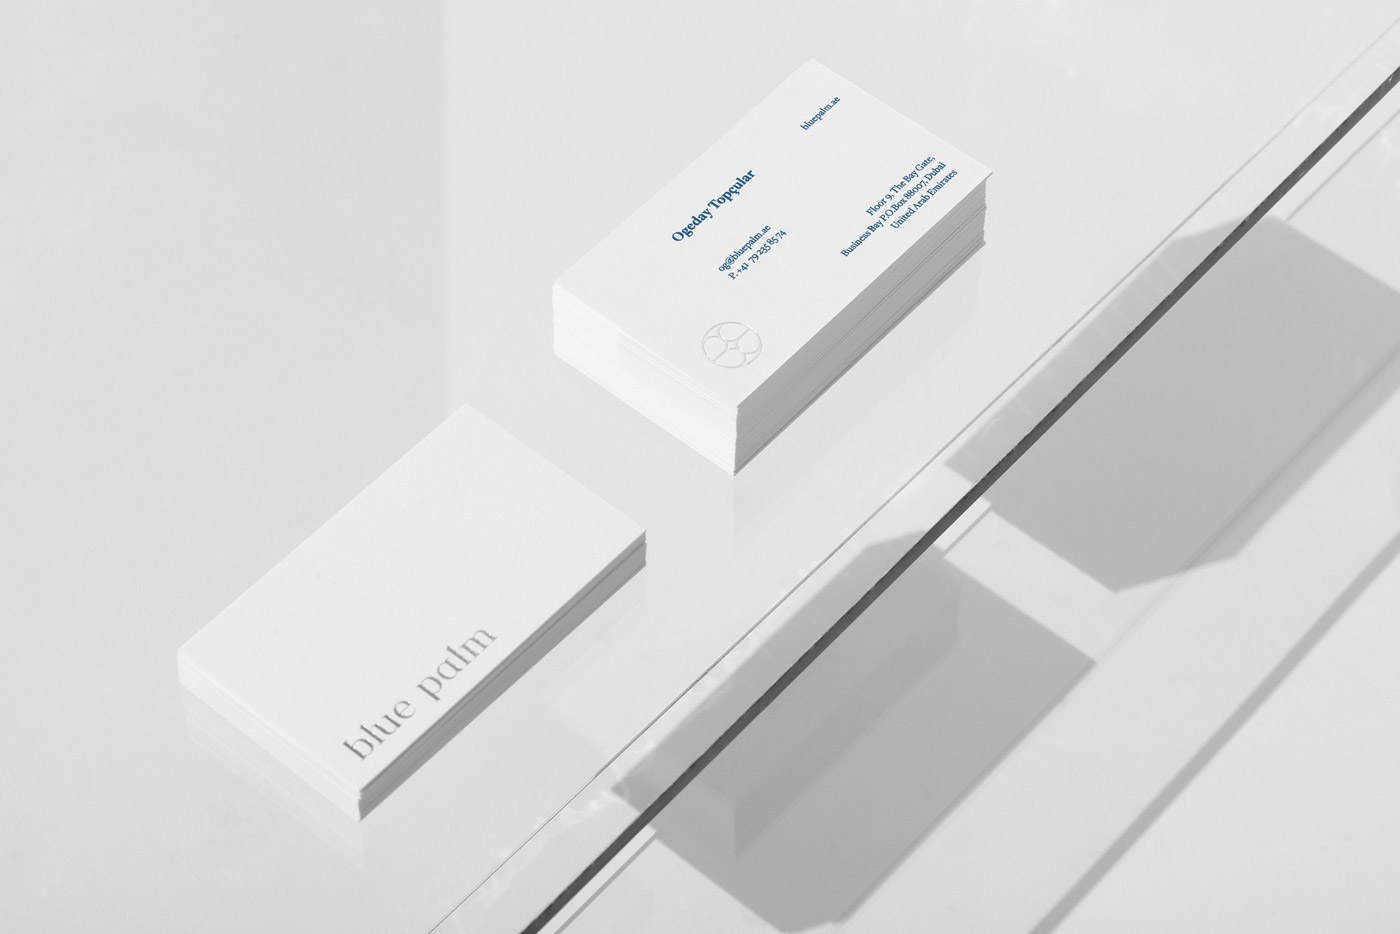 Graphic design and branding by Sabbath Studio for financial company Blue Palm.